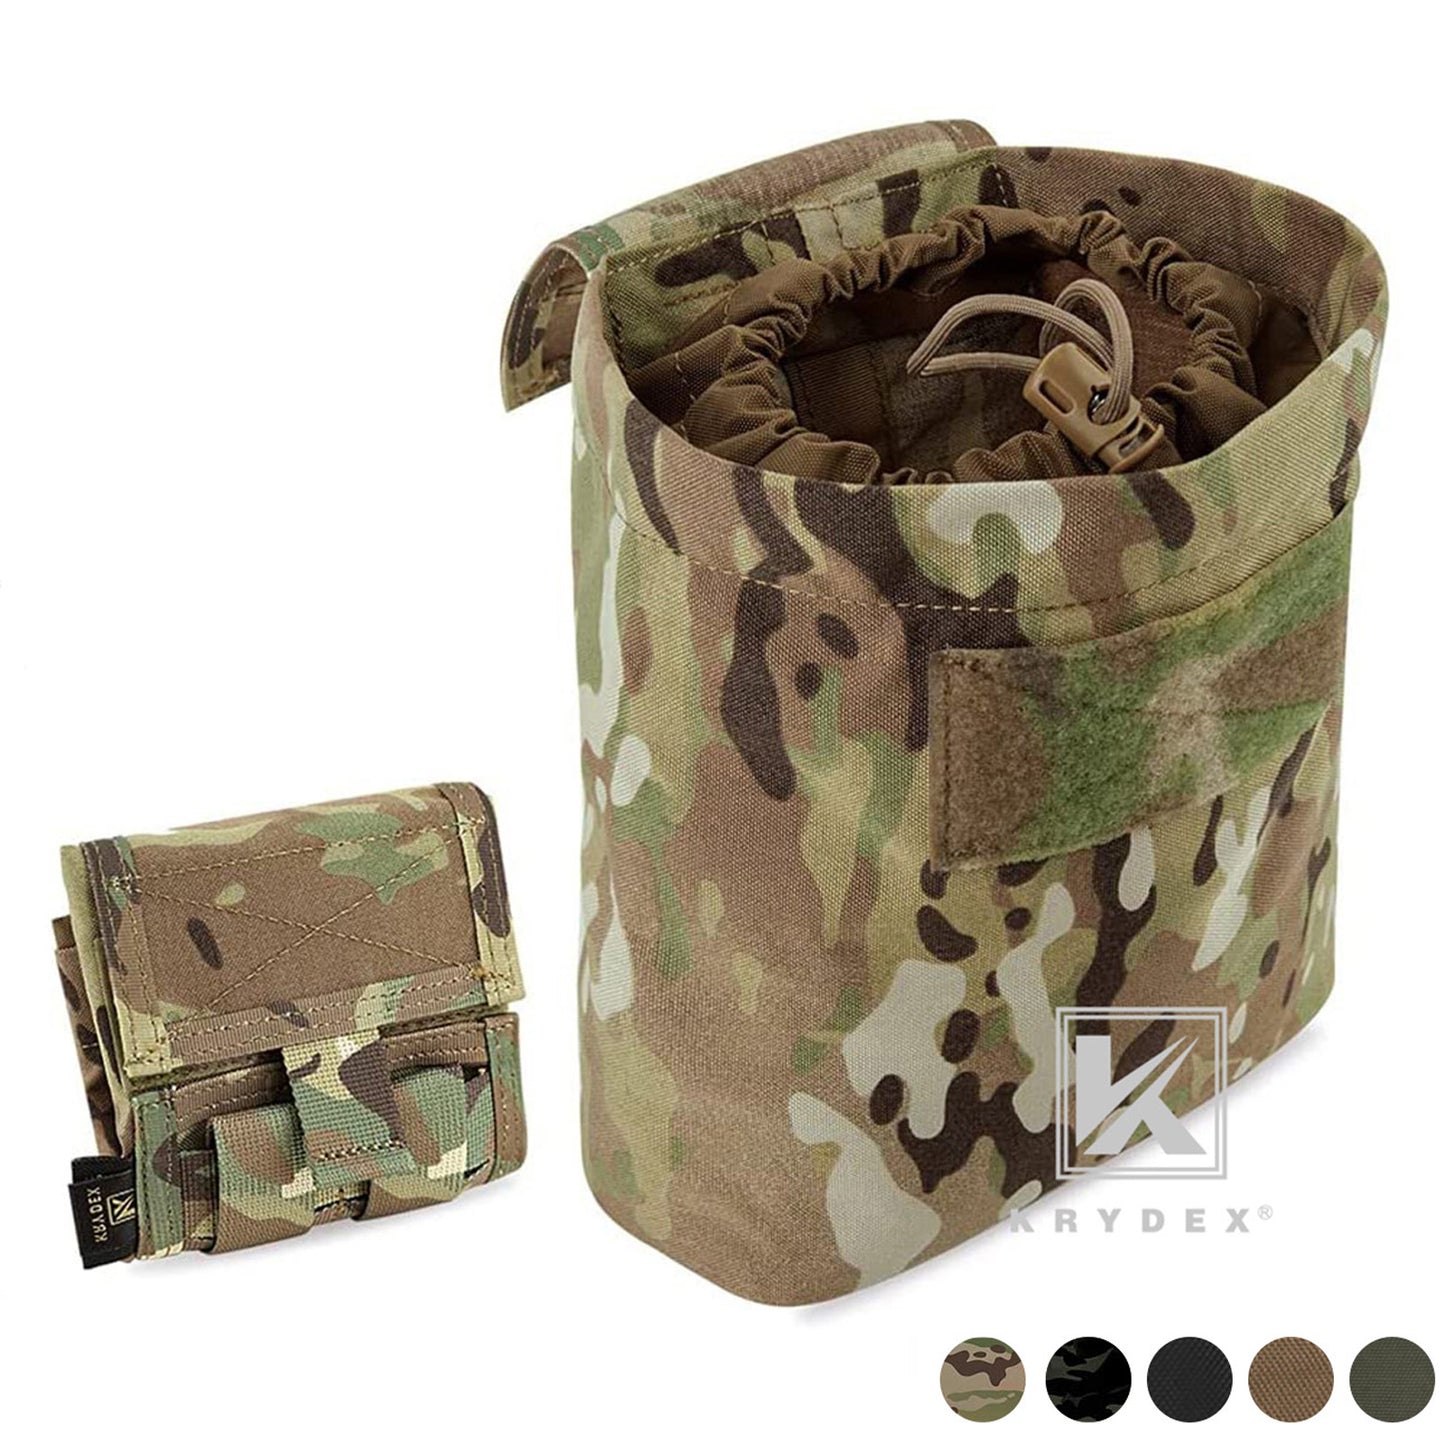 KRYDEX Tactical Molle ROLL-UP Ammo Magazine Dump Pouch Mag Recovery Foldable Utility Pouch